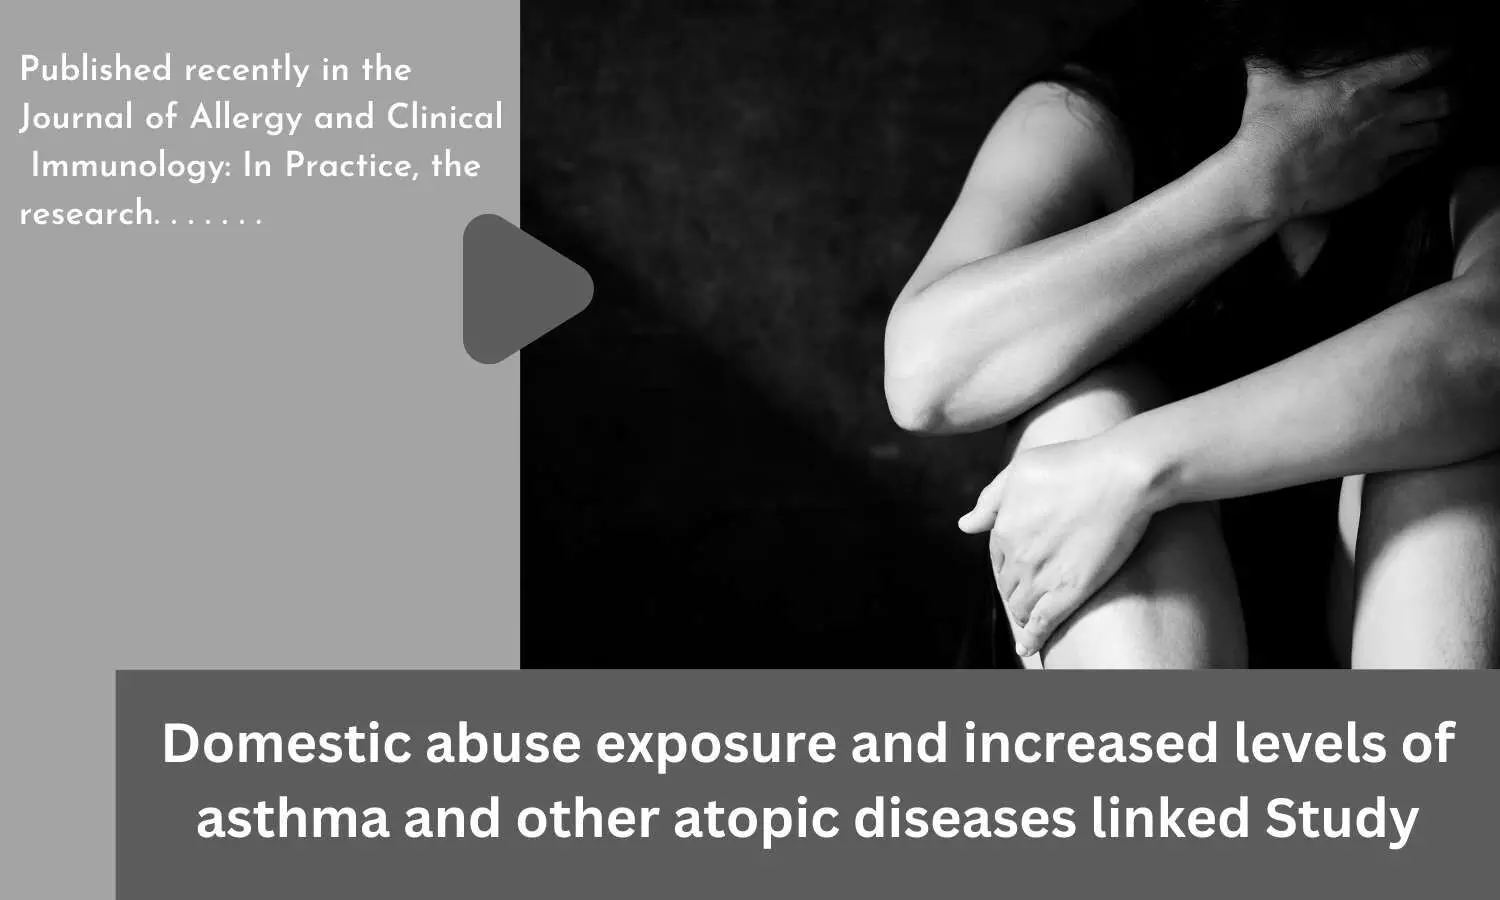 Domestic abuse exposure and increased levels of asthma and other atopic diseases linked Study